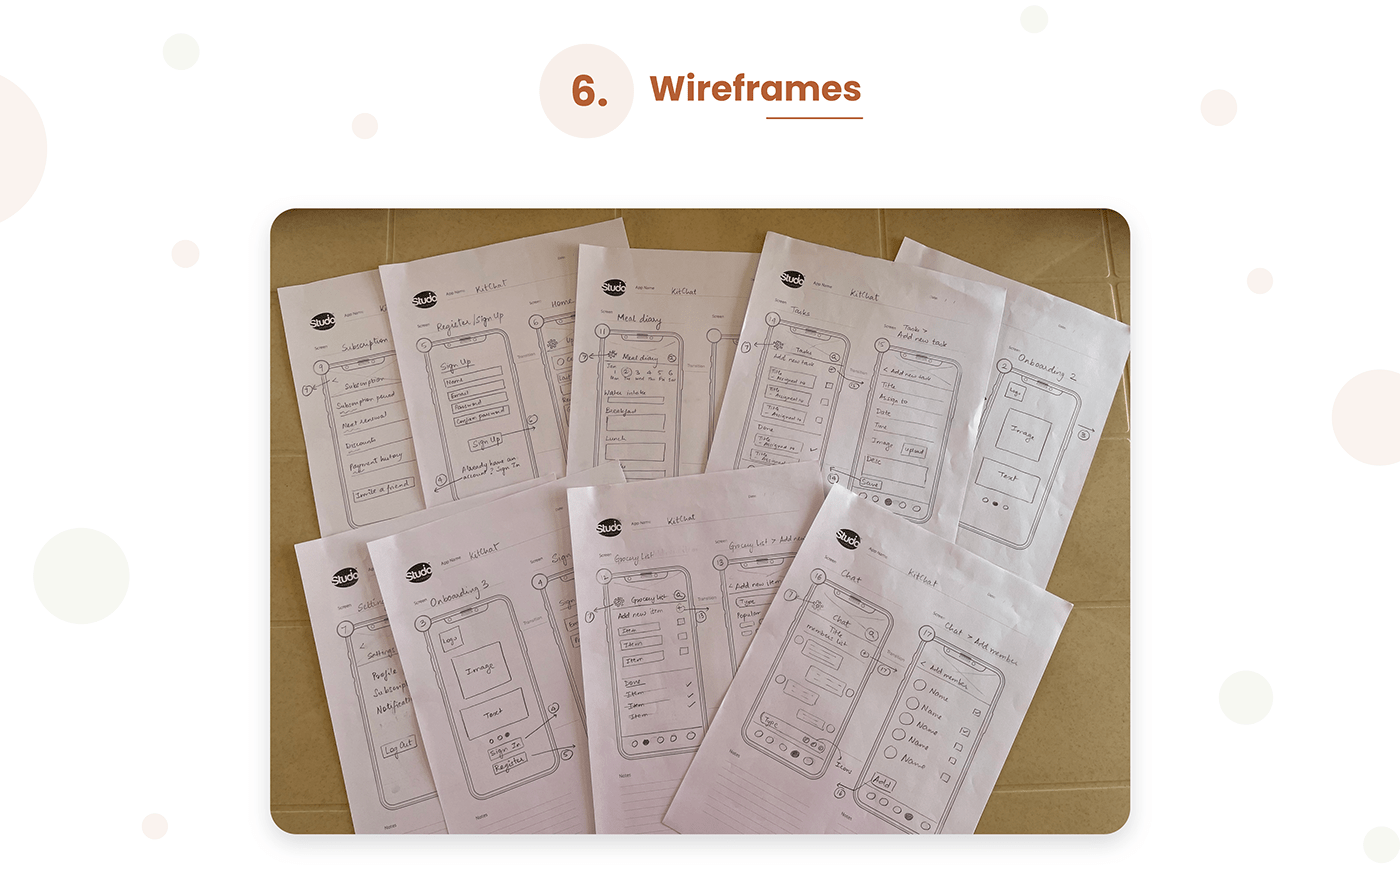 Wireframes for the UI/UX case study of KitChat app